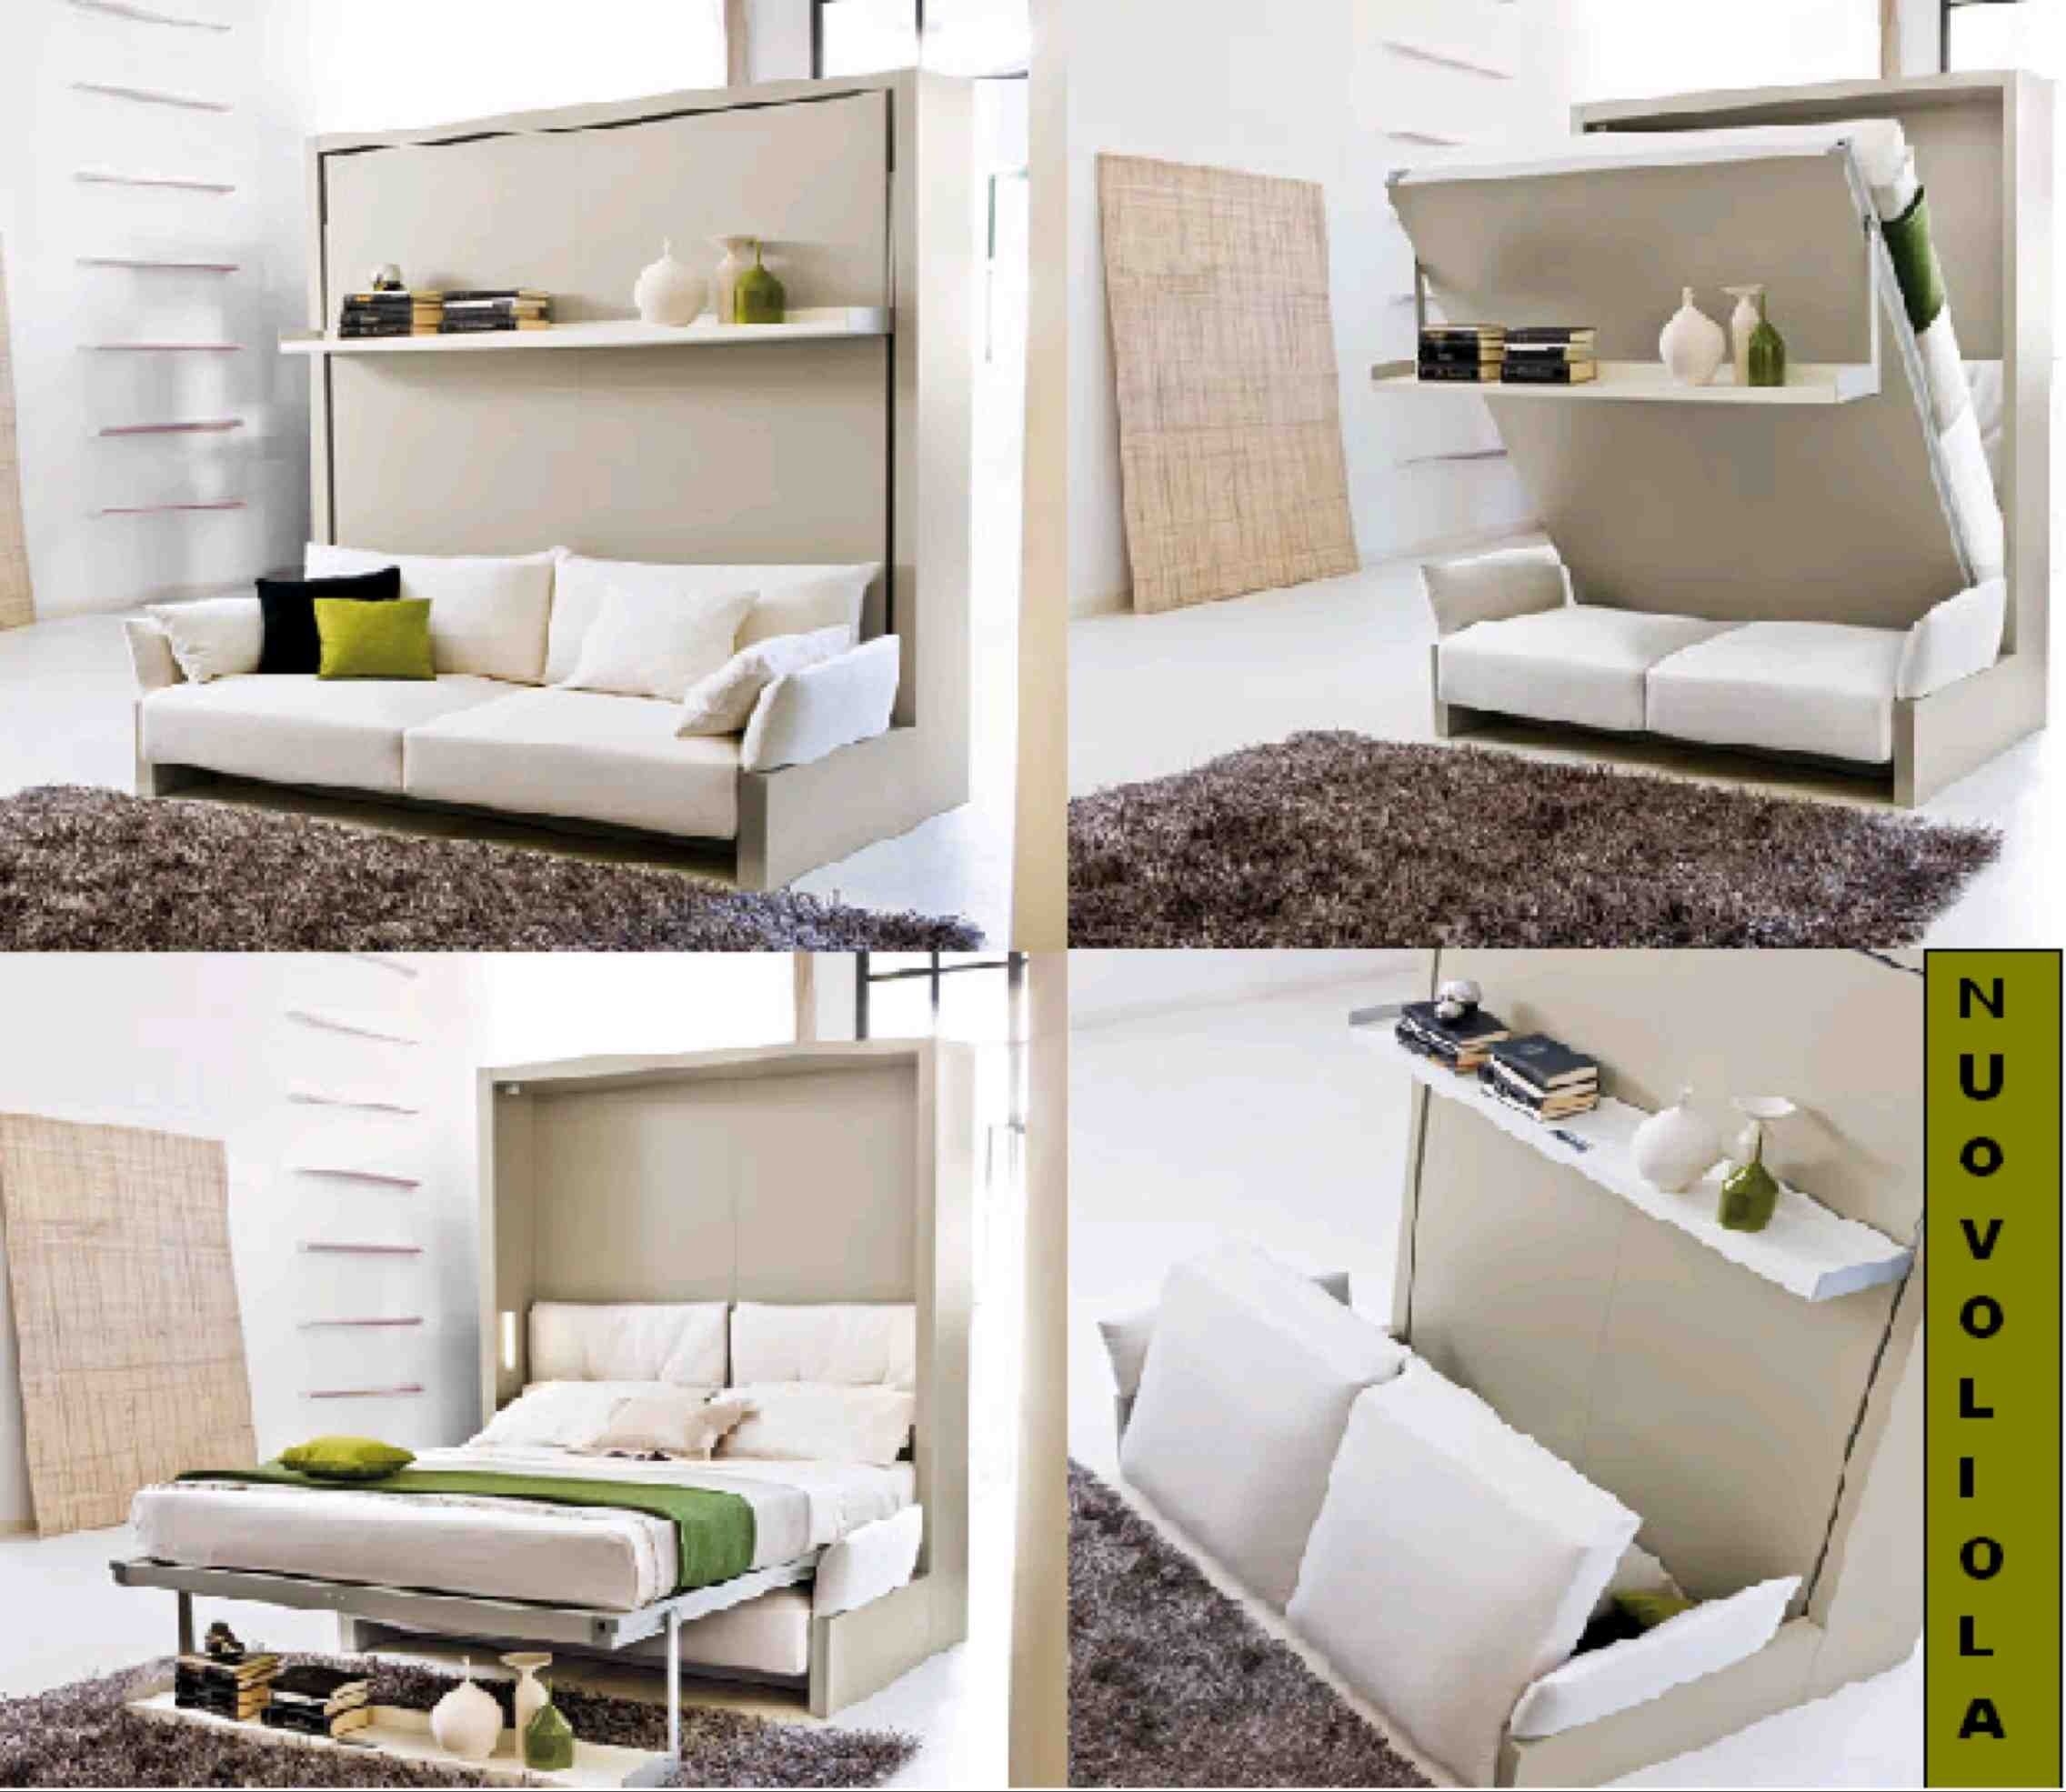 Turn a sofa into a bed